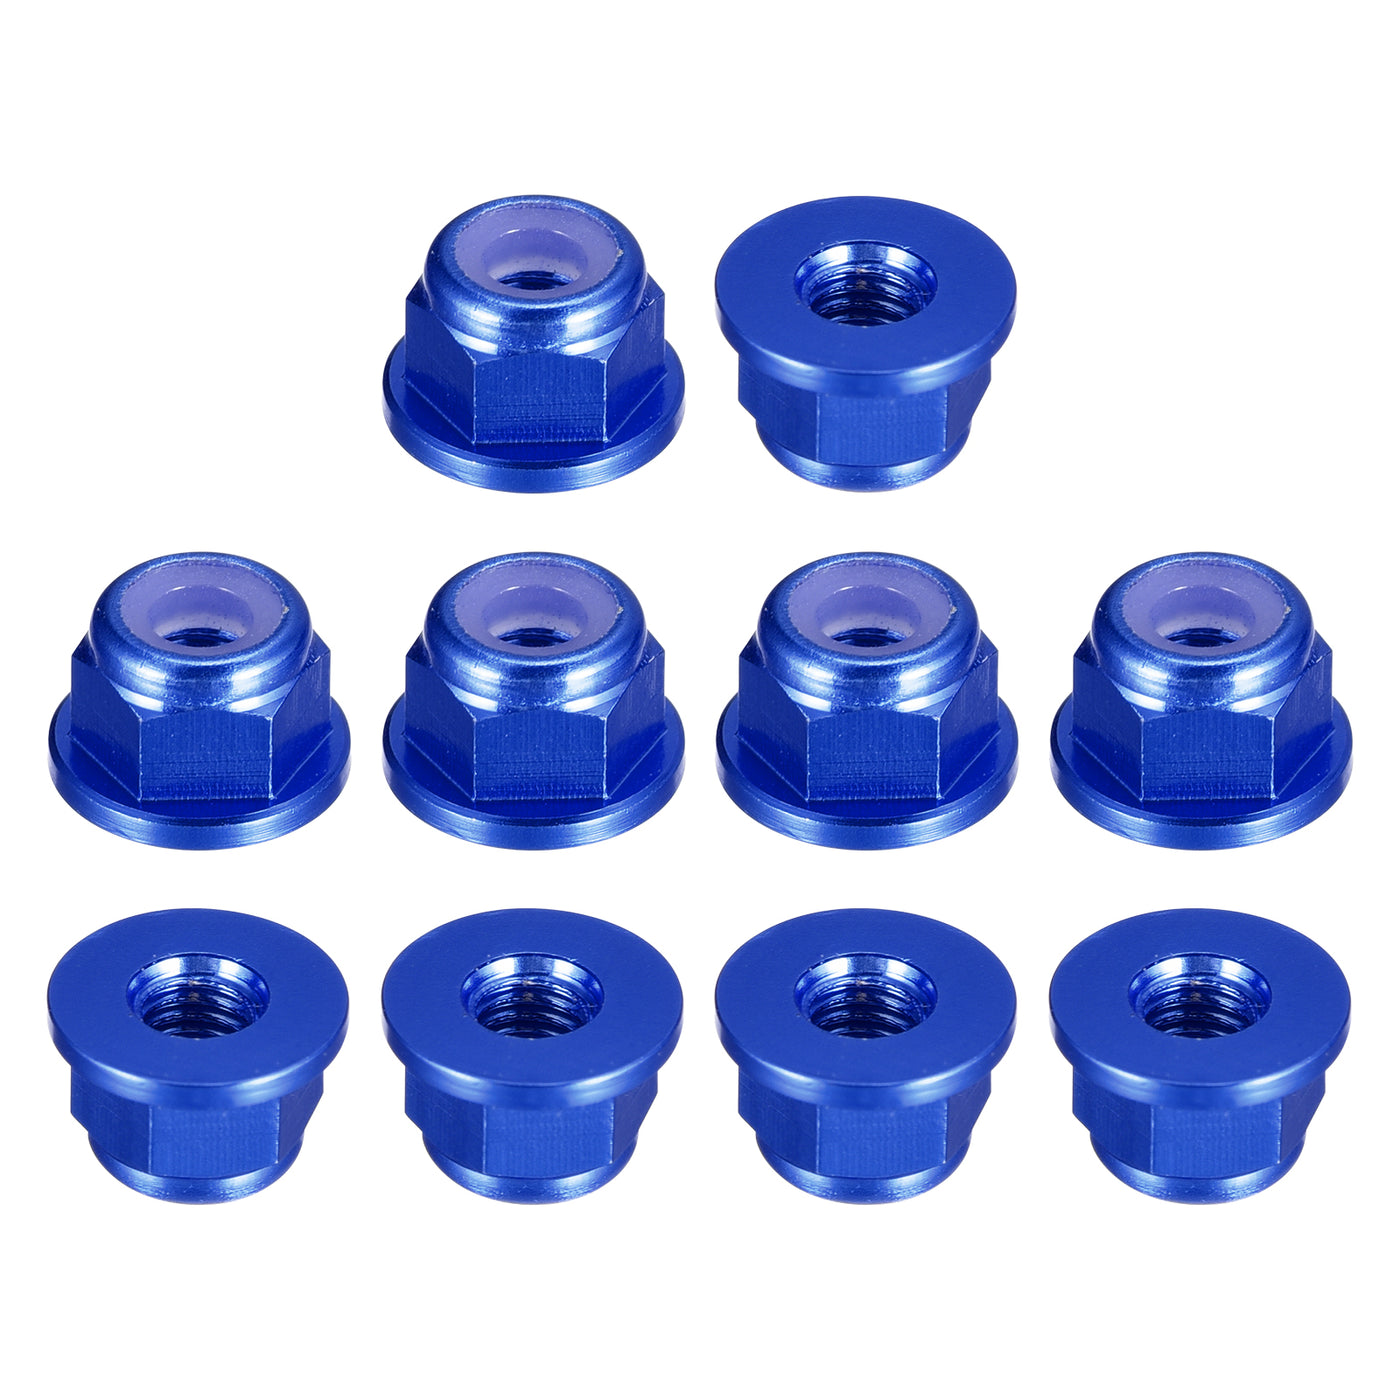 uxcell Uxcell Nylon Insert Hex Lock Nuts, 10pcs - M2 x 0.4mm Aluminum Alloy Self-Locking Nut, Anodizing Flange Lock Nut for Fasteners (Sapphire Blue)